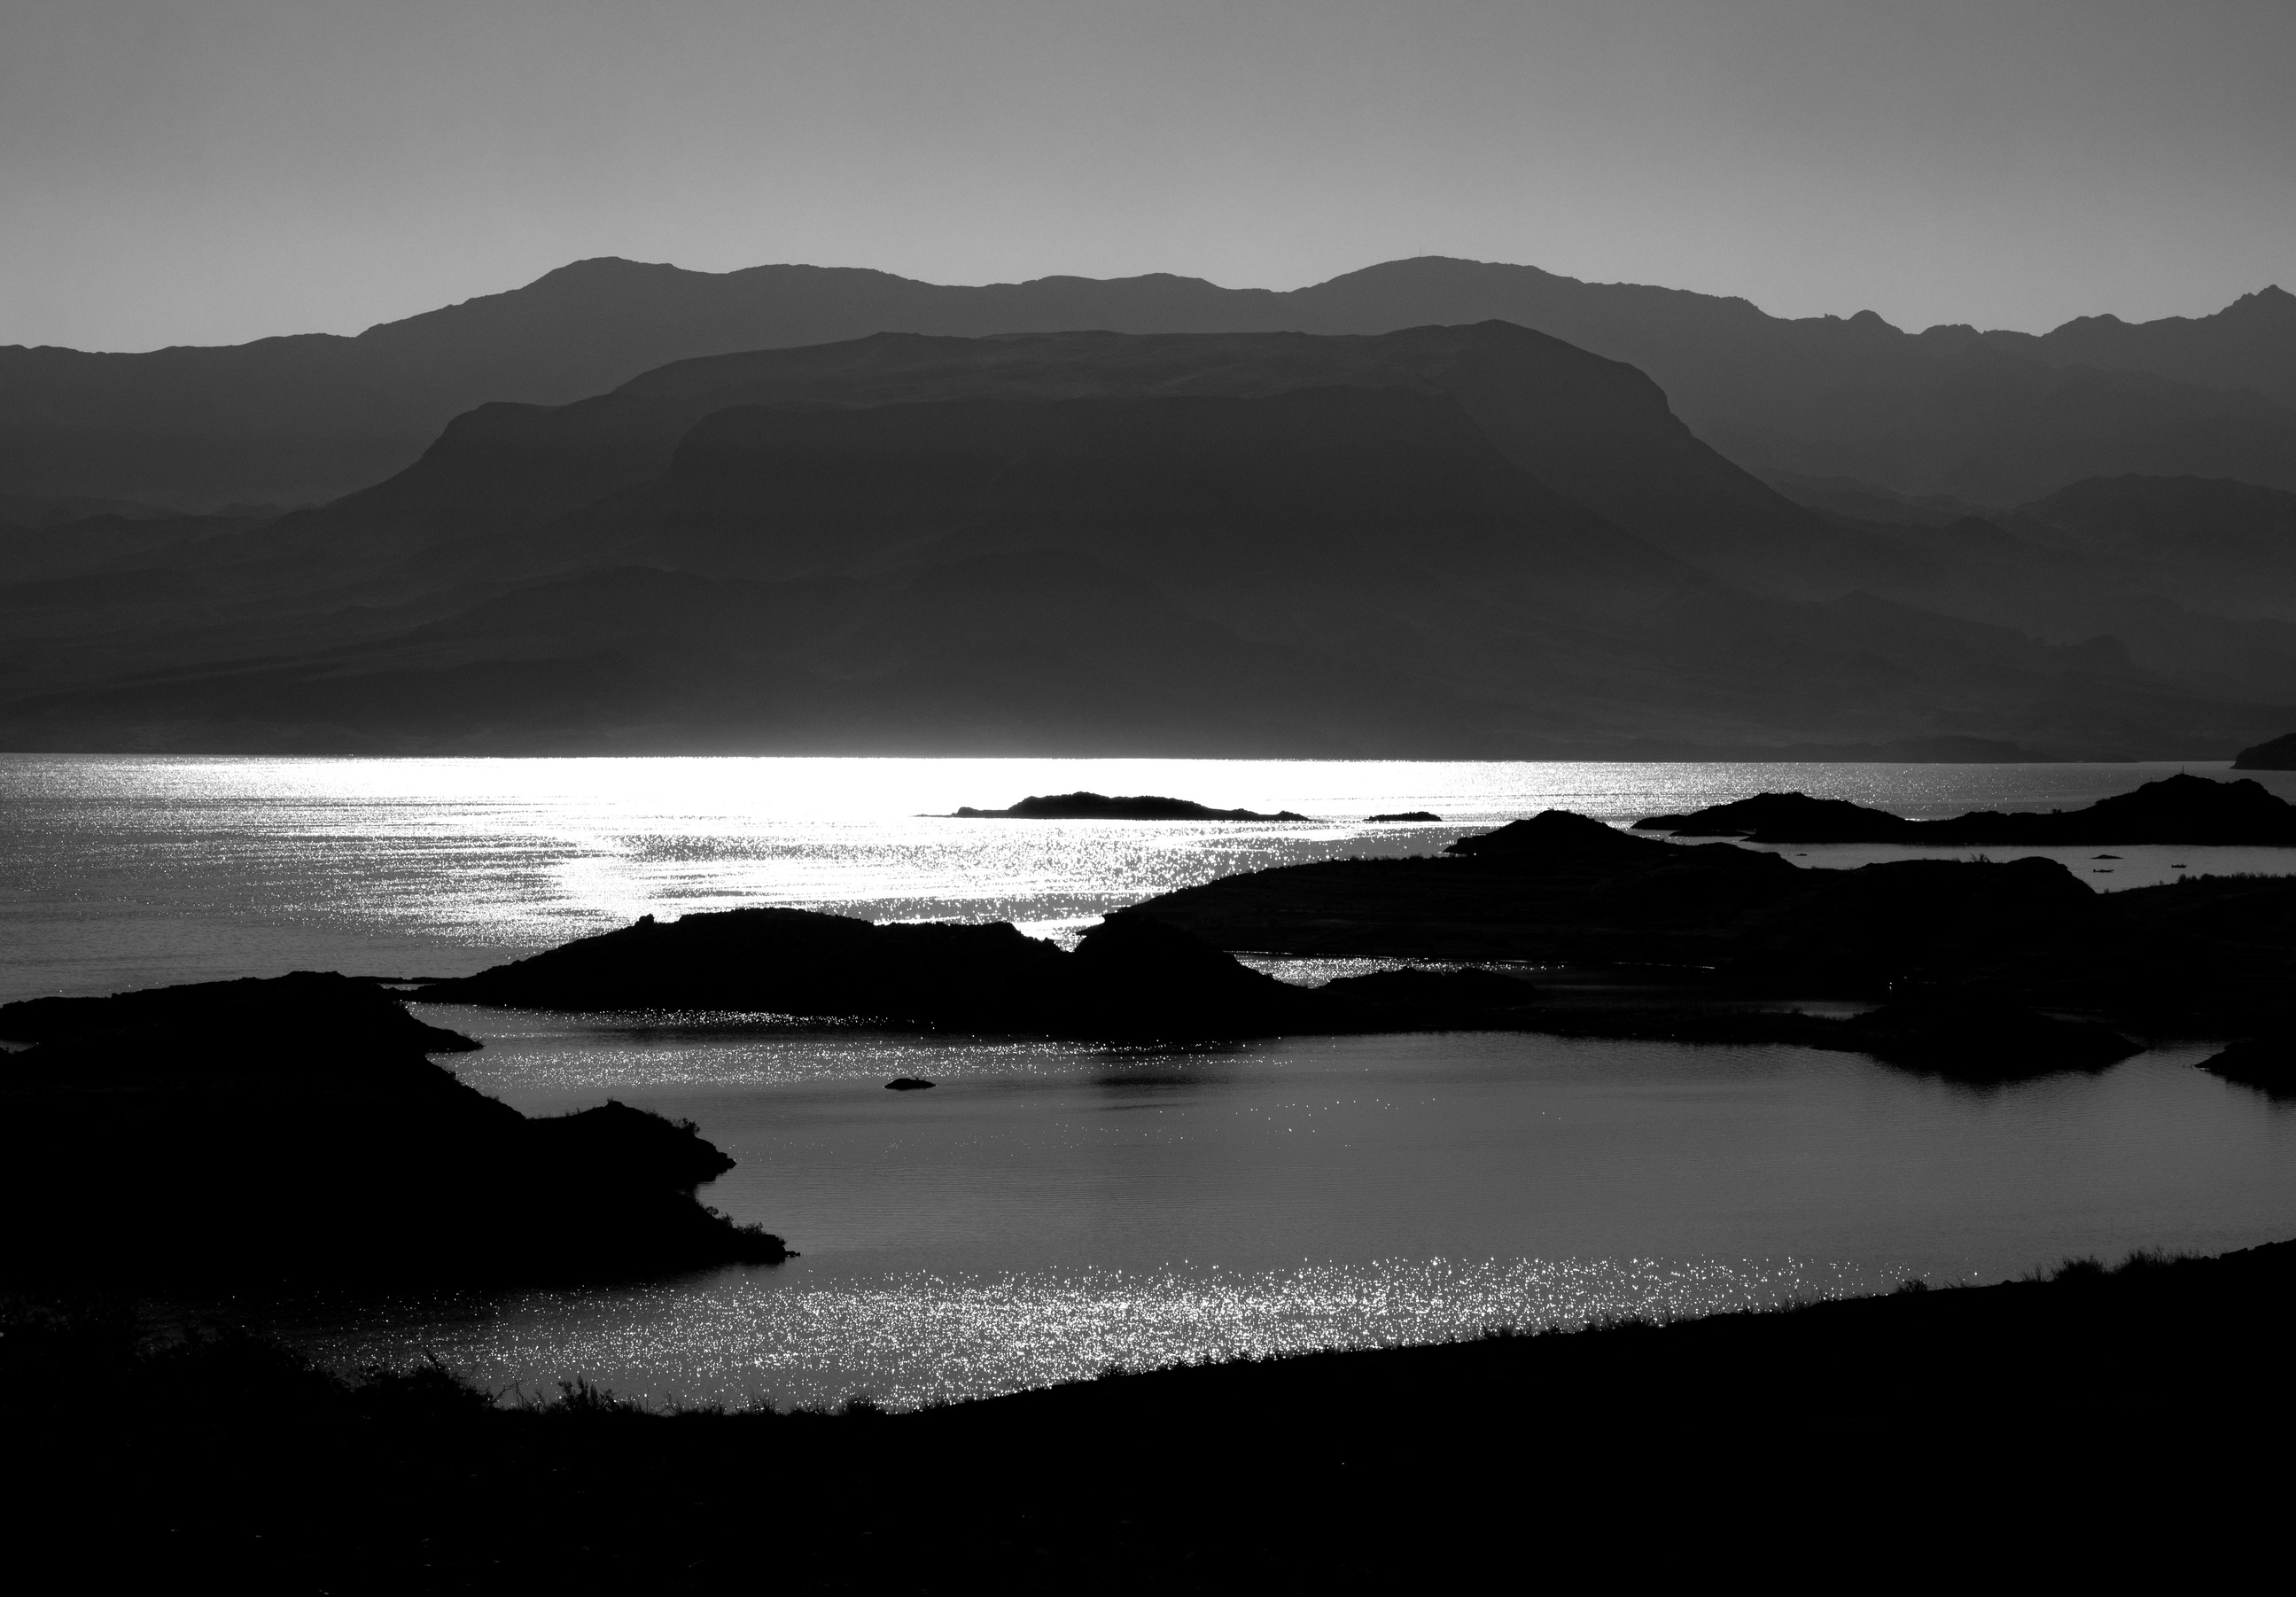 monochrome lake with bright reflection in center surrounded by hazy mountains and small islands